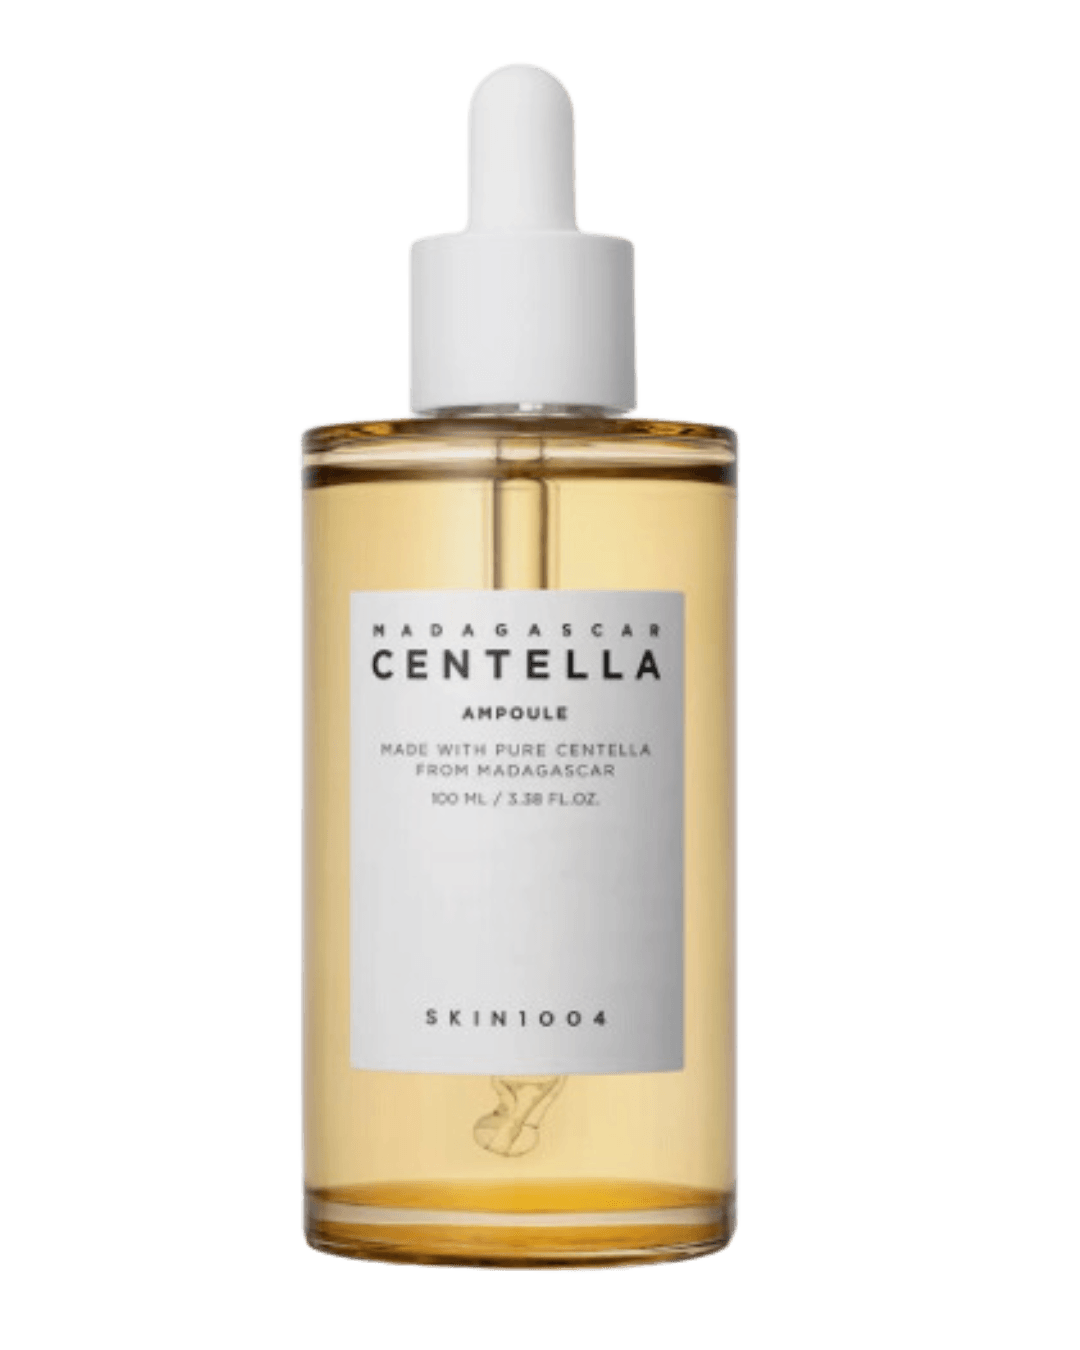 Daily Vanity Beauty Awards 2024 Best Skincare SKIN1004 Centella Ampoule Voted By Beauty Experts